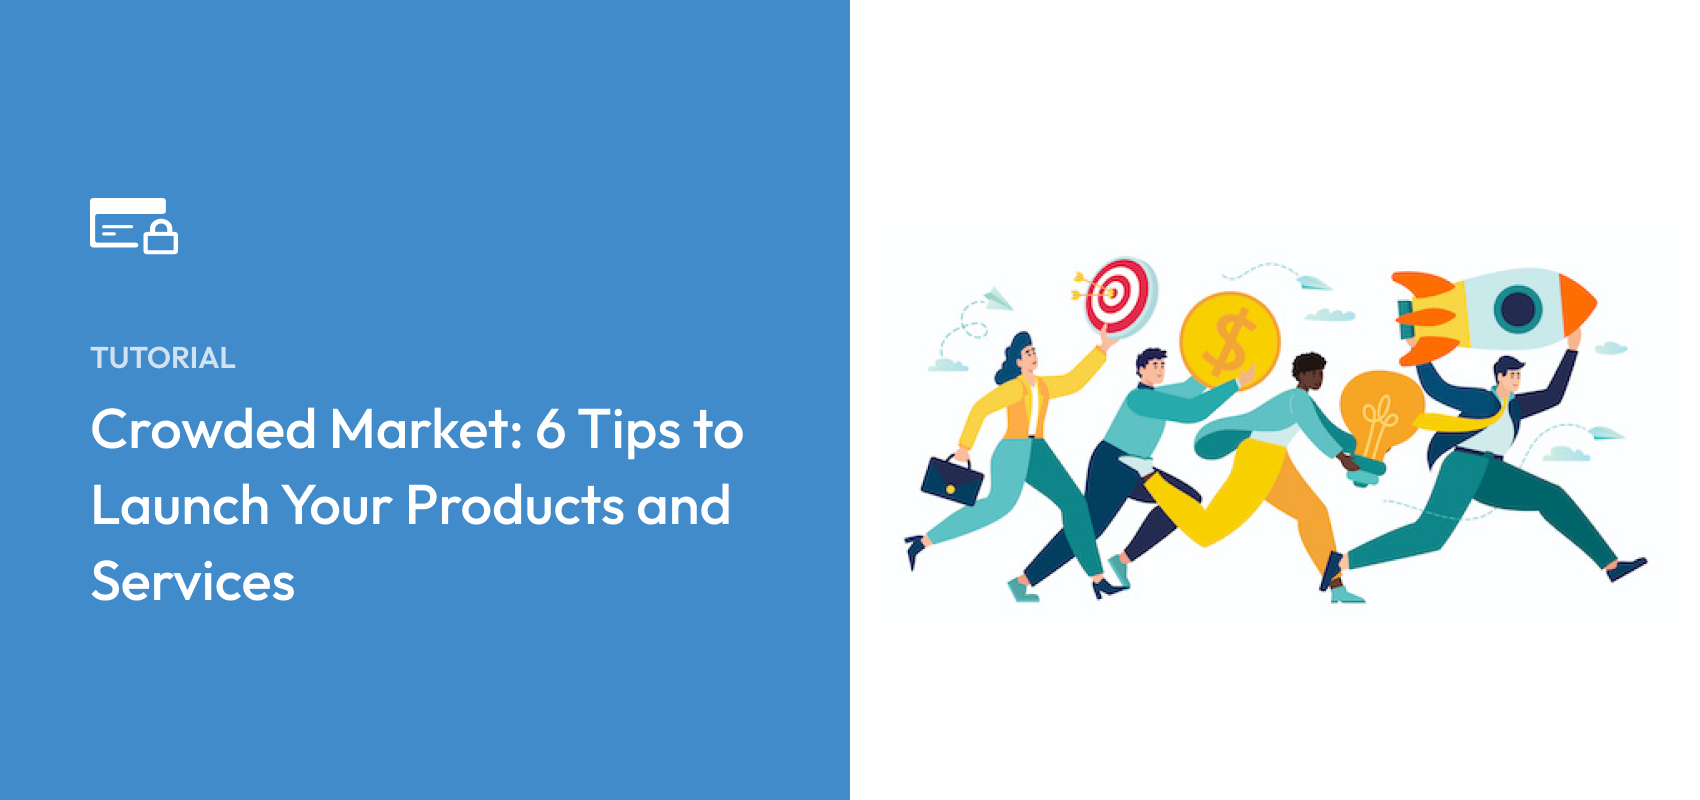 Crowded Market: 6 Tips to Launch Your Products and Services